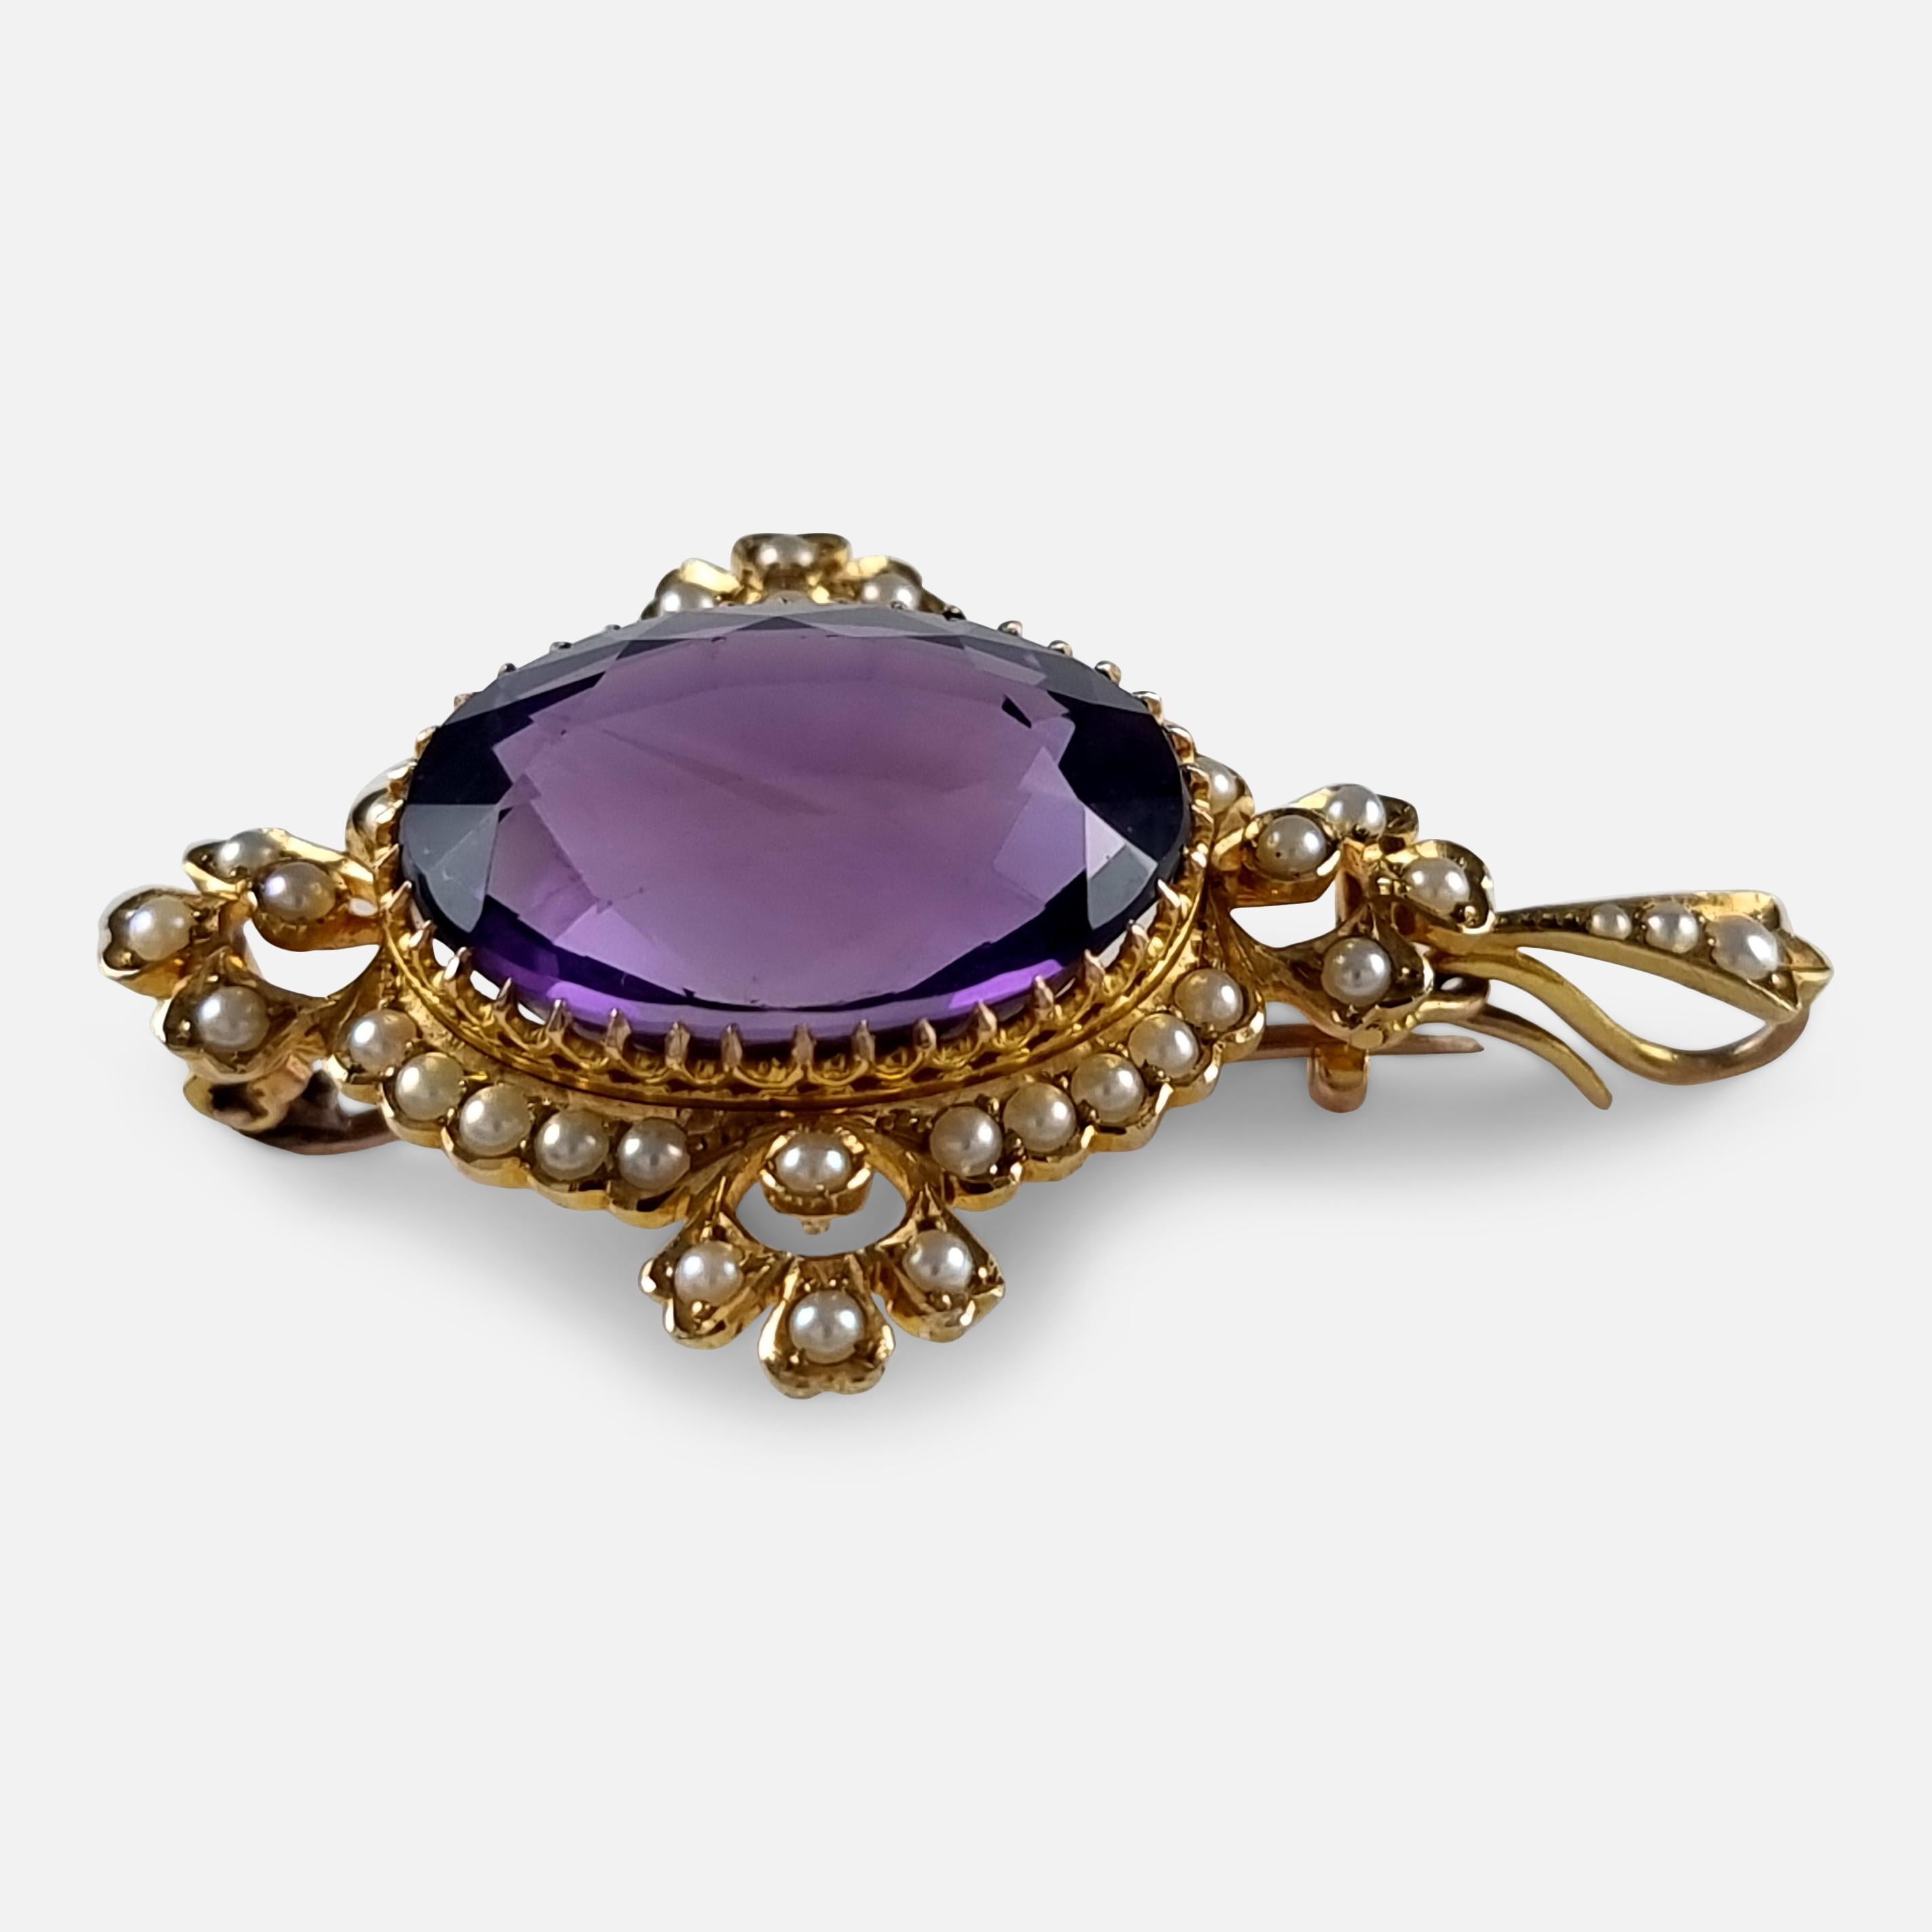 Edwardian 15ct Gold Amethyst and Seed Pearl Pendant Brooch 8